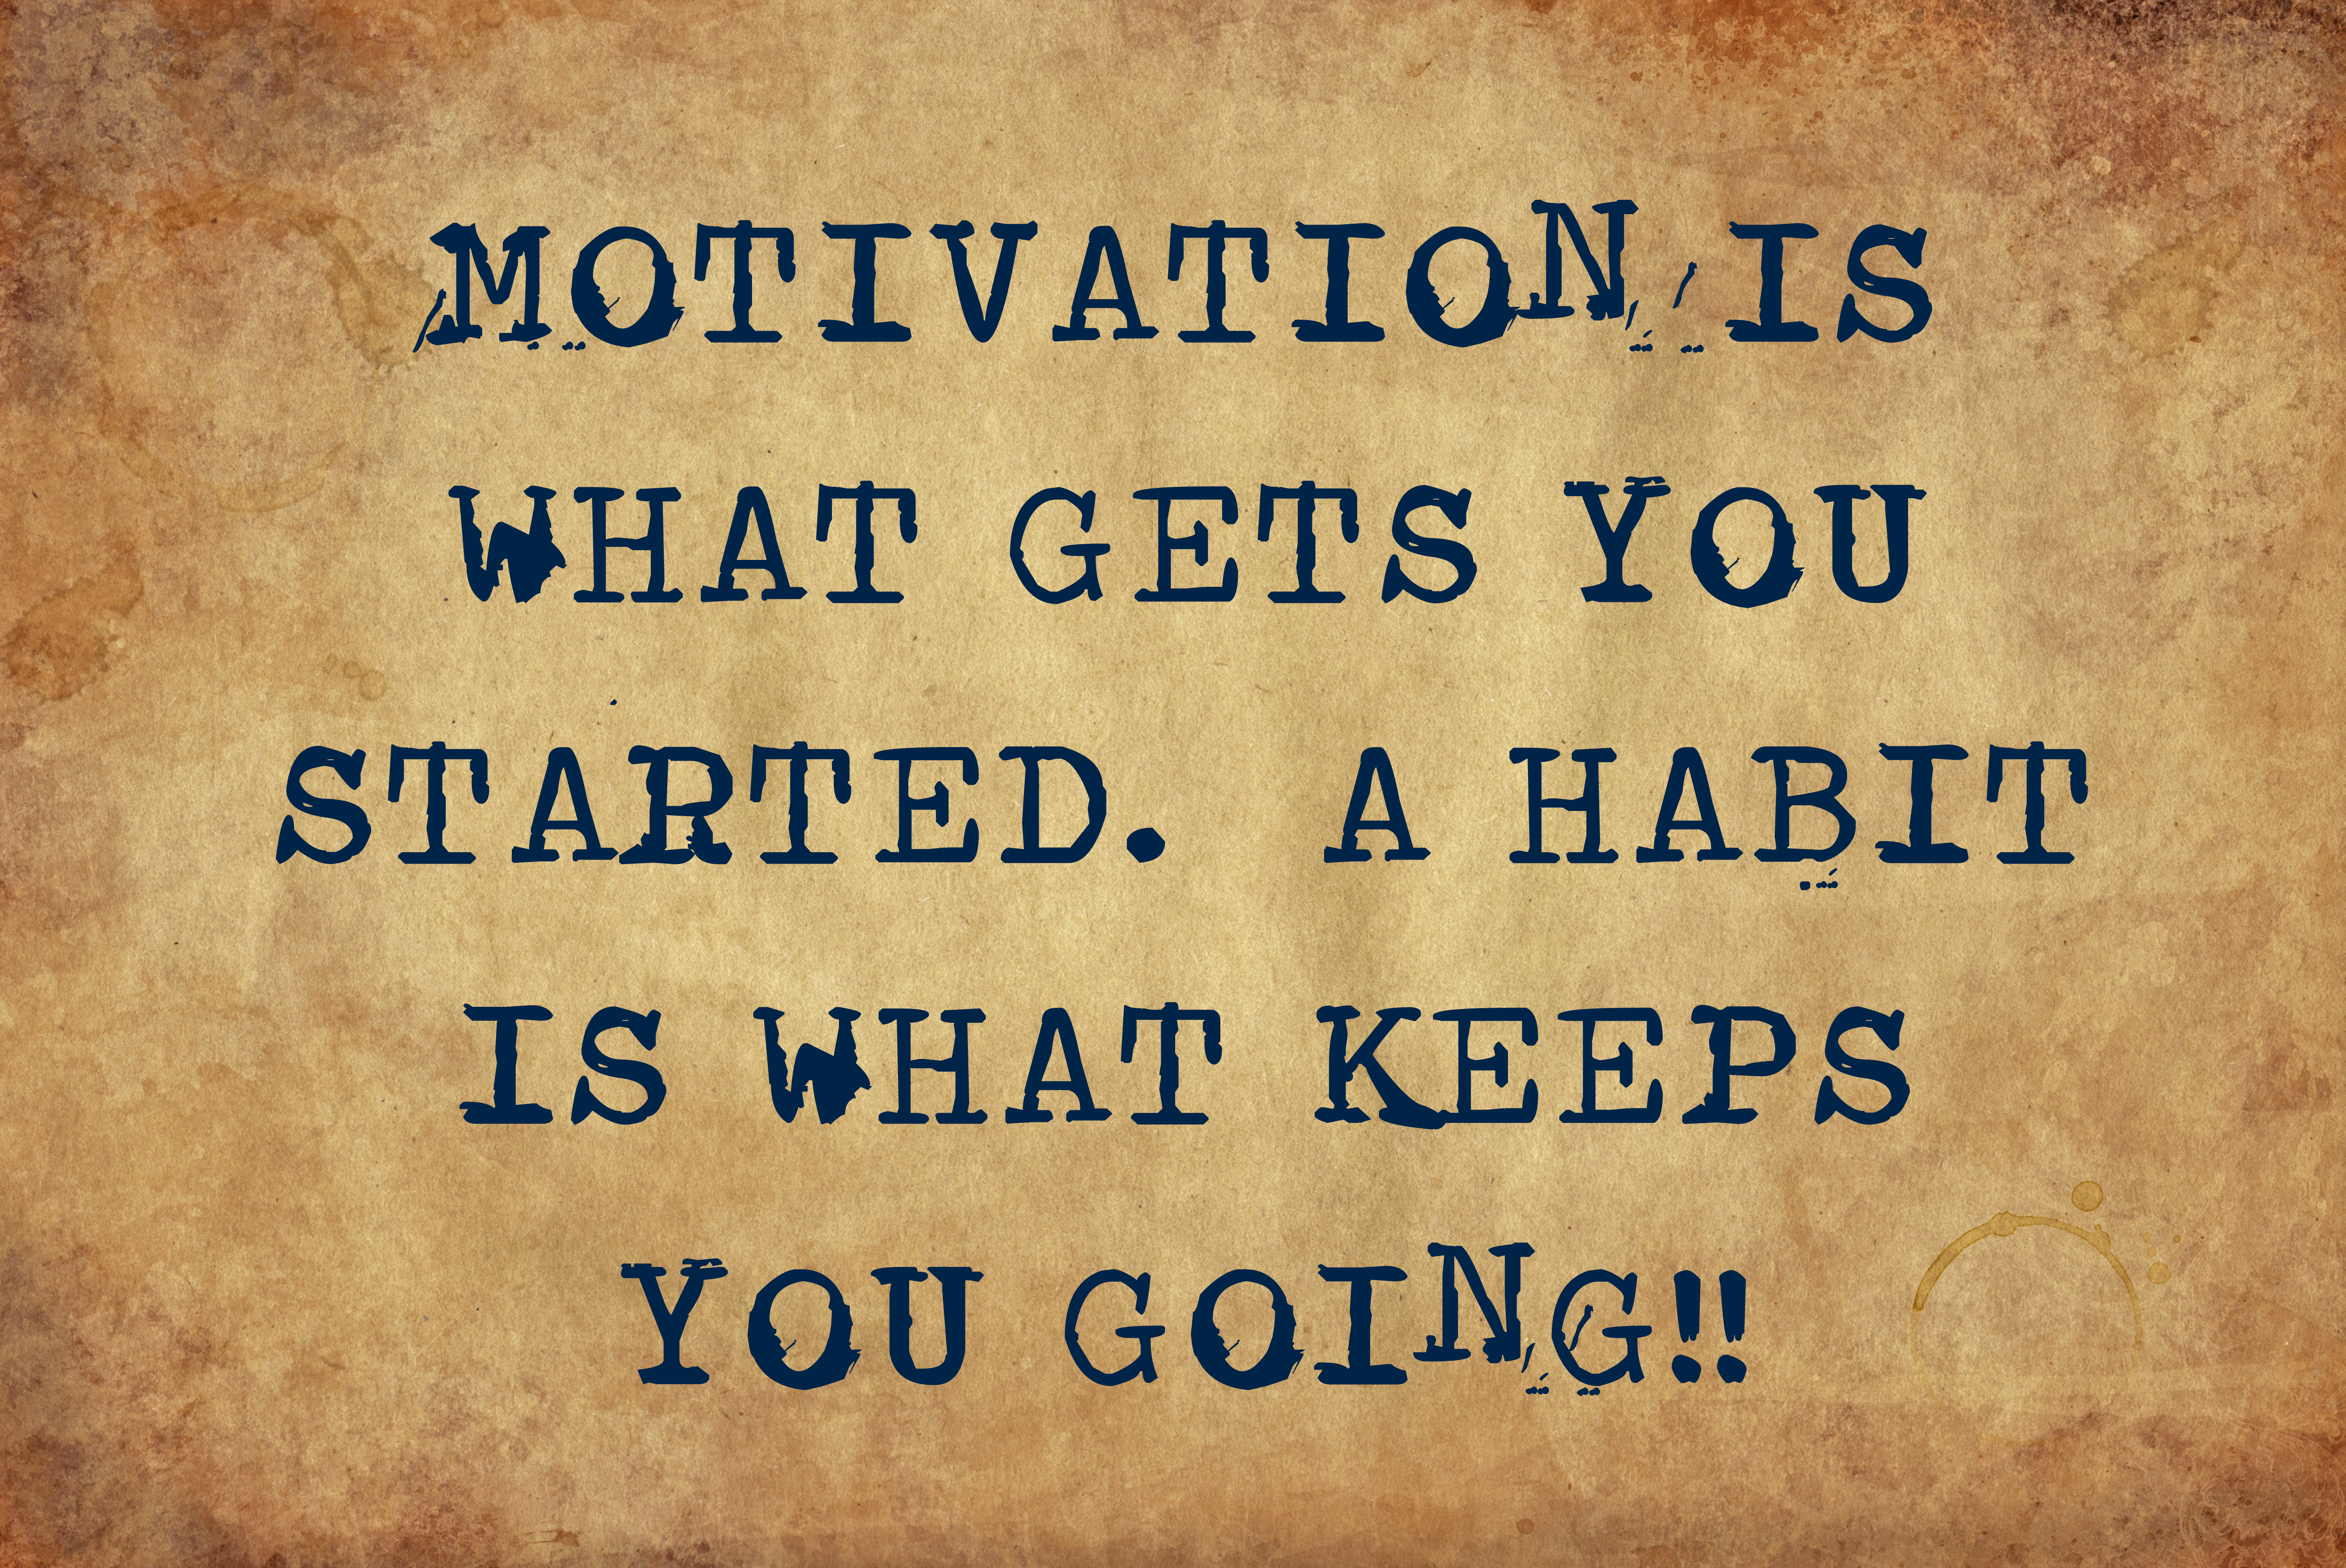 Do your life taste. Motivation is what gets you started. Habit is what keeps you going. Start your Habit. Motivation of Fear. What keeps you going.